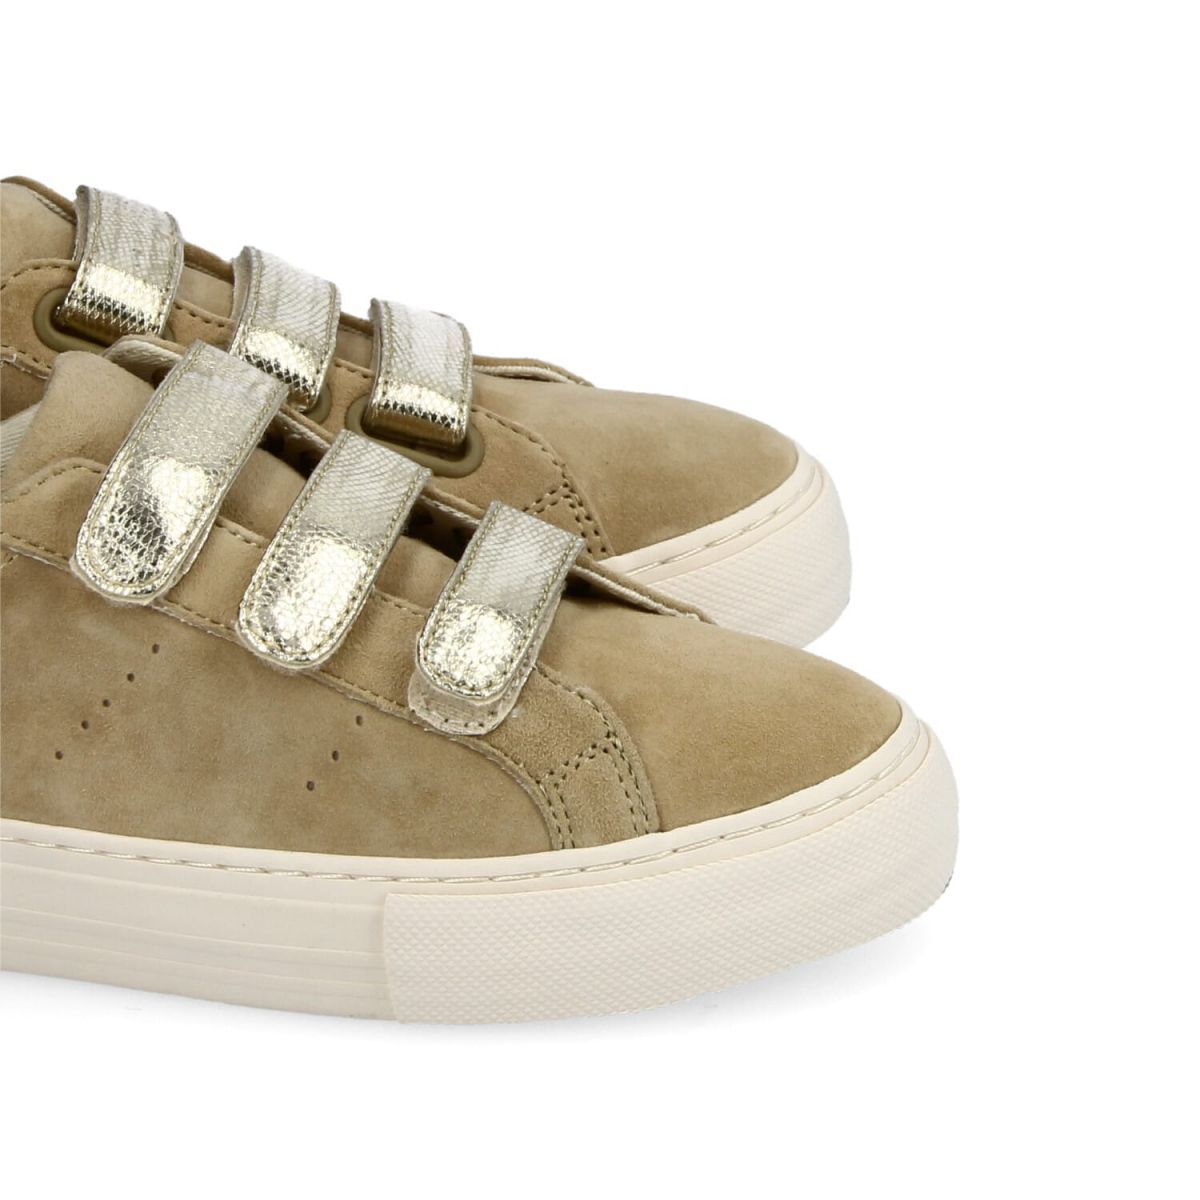 Arcade Straps Suede Beige Sneakers KNGDWI0418 - 5